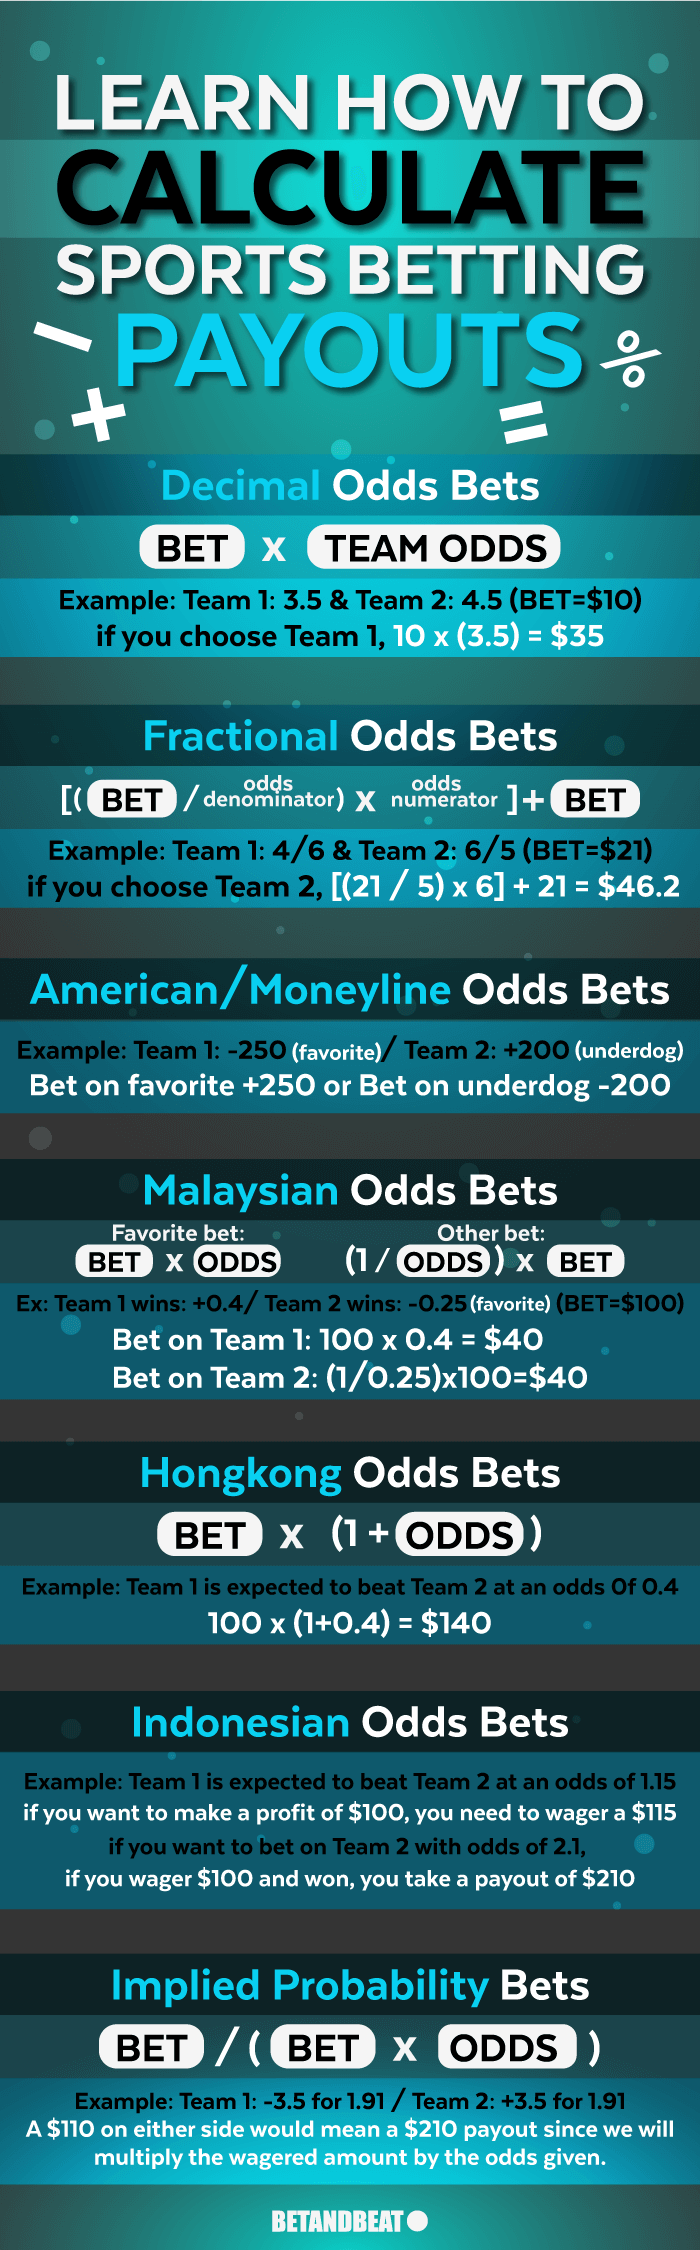 A rundown of how to calculate sports betting payouts depending on the odds format